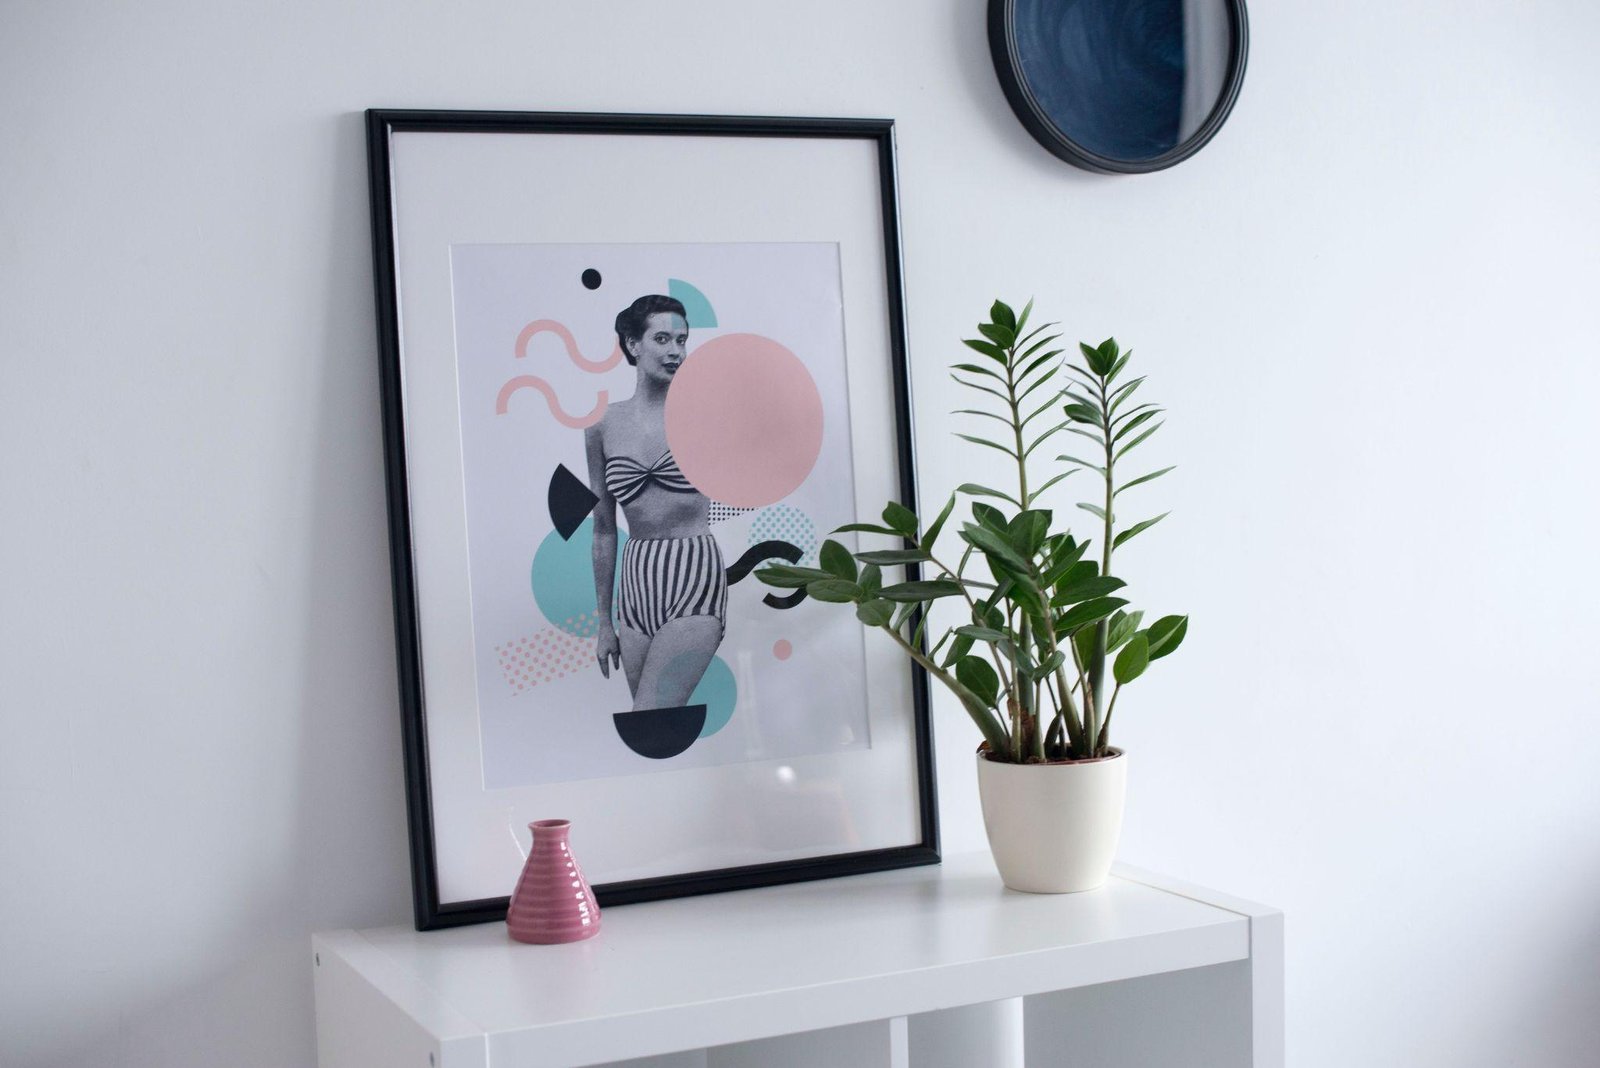 Choosing Wall Art Prints for Your Home